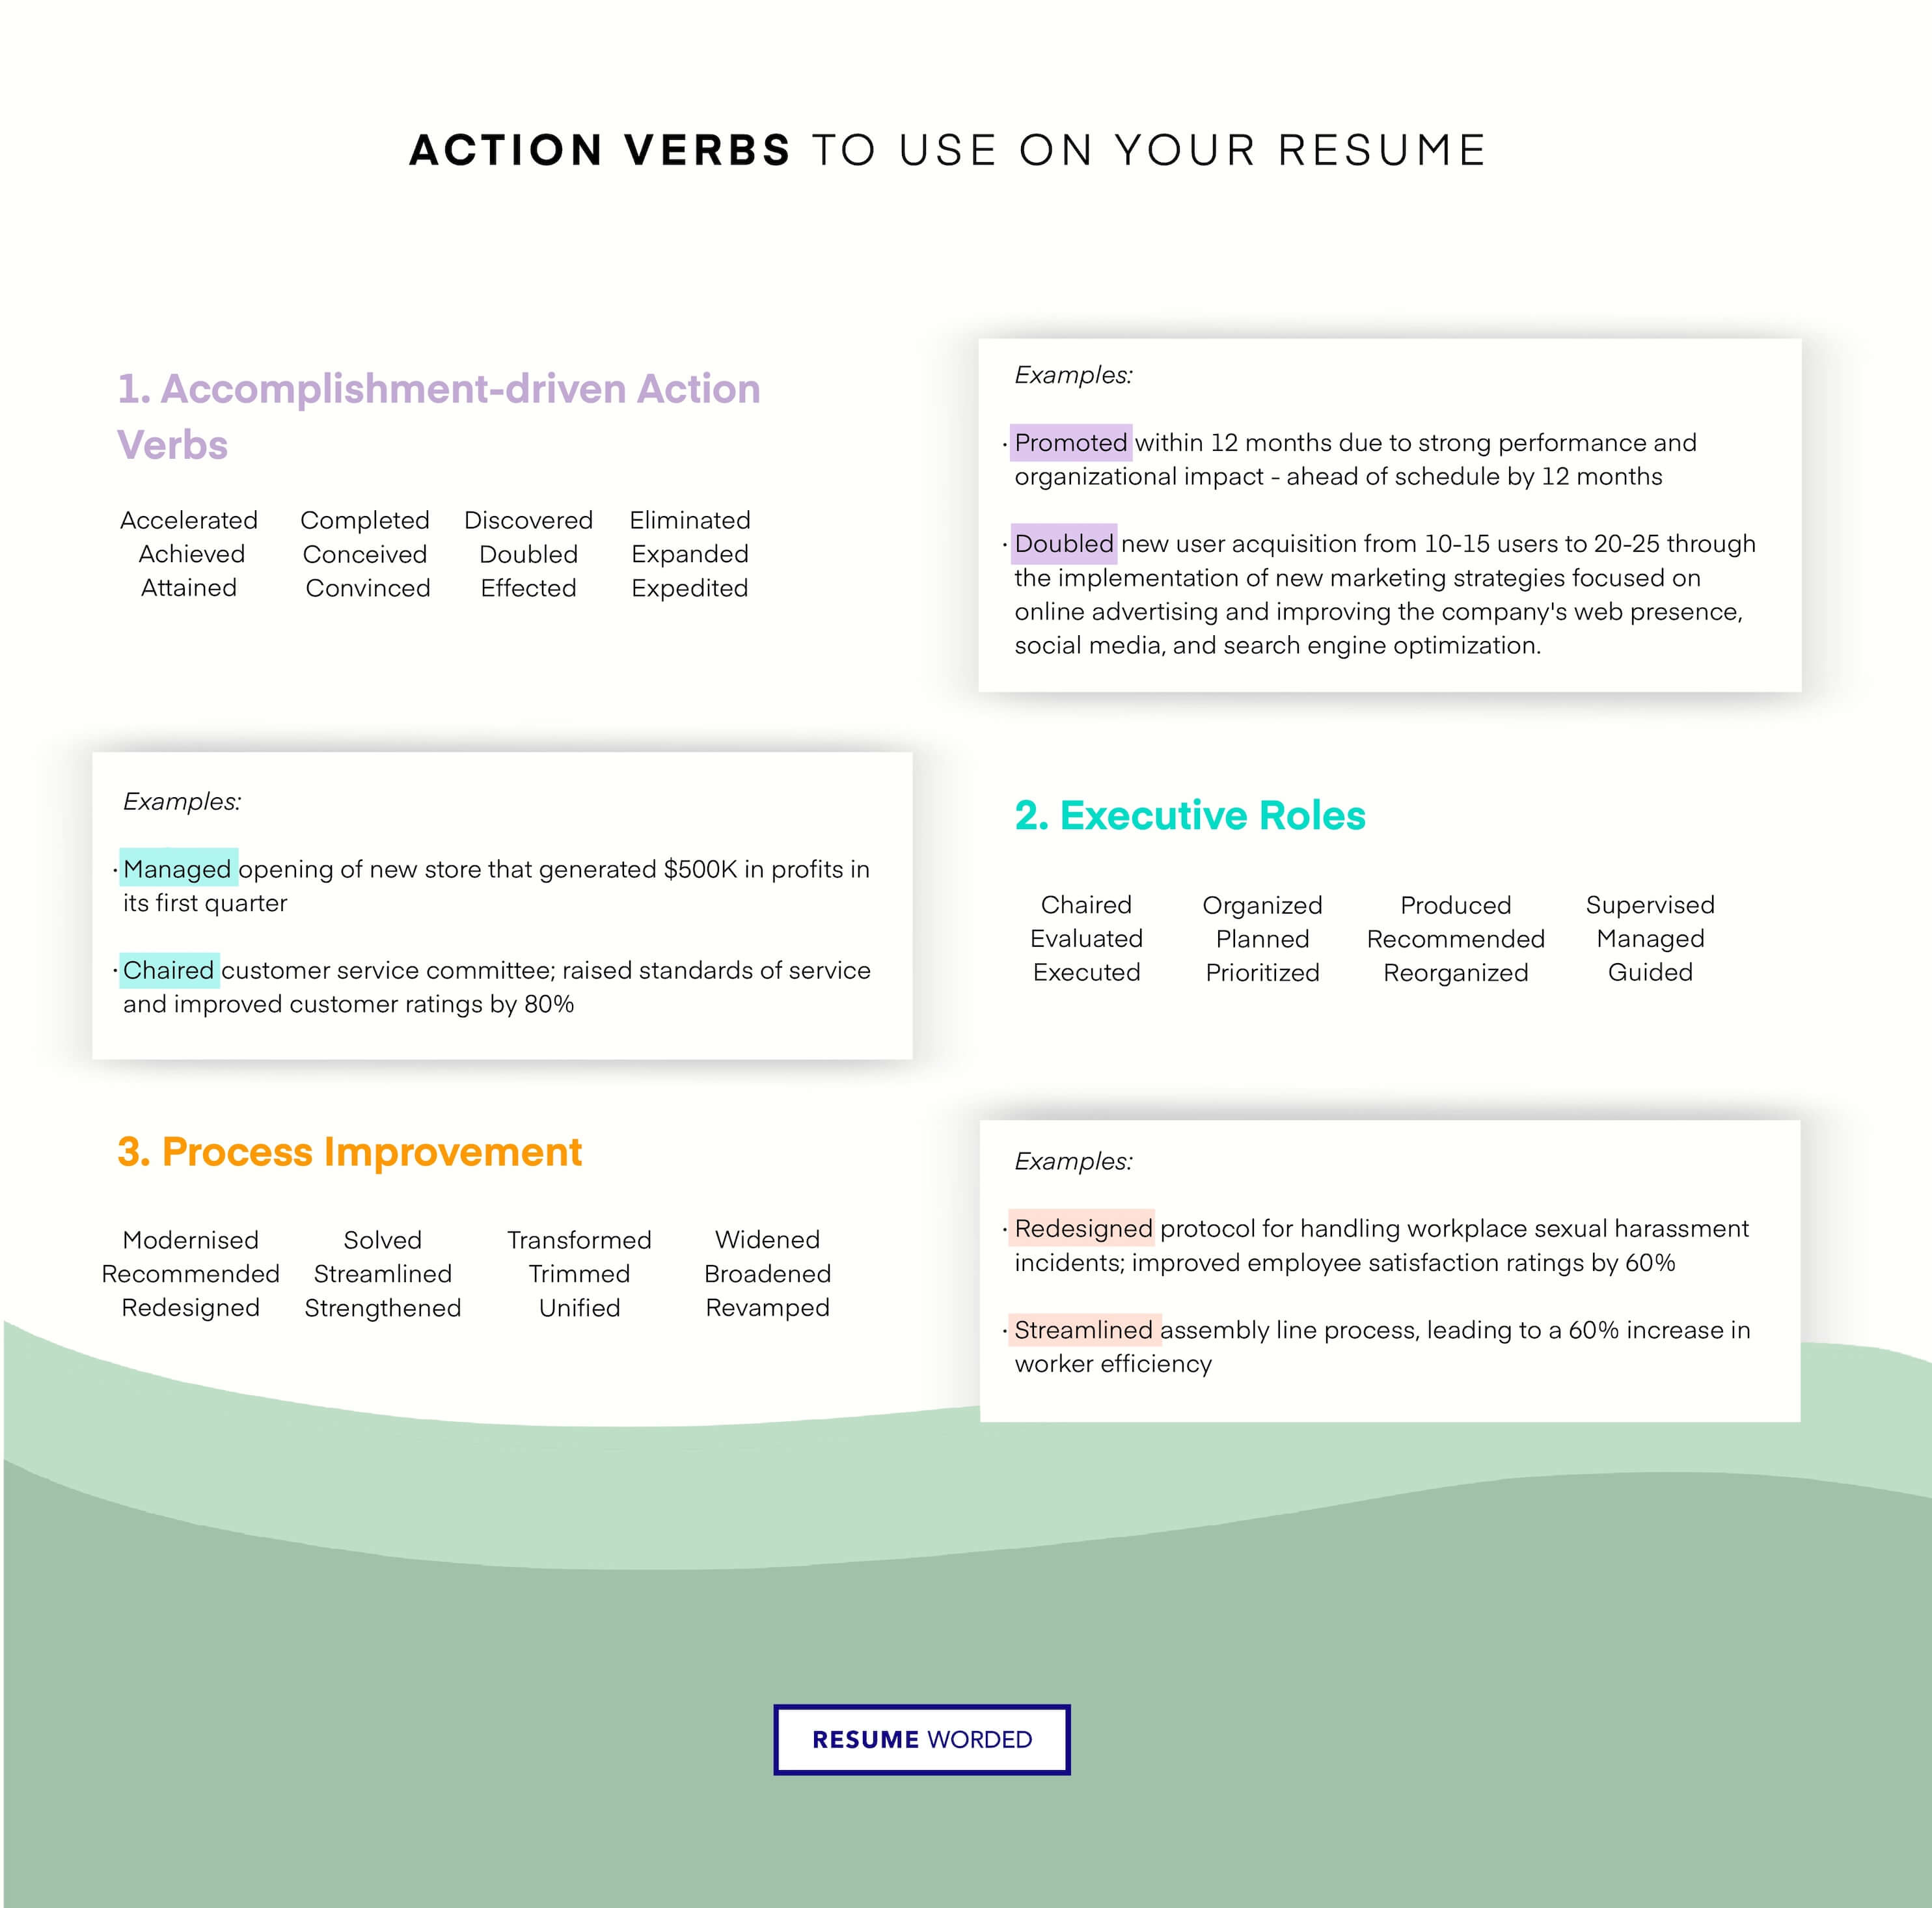 Great action verbs make accomplishments shine - Marketing Operations Manager Resume